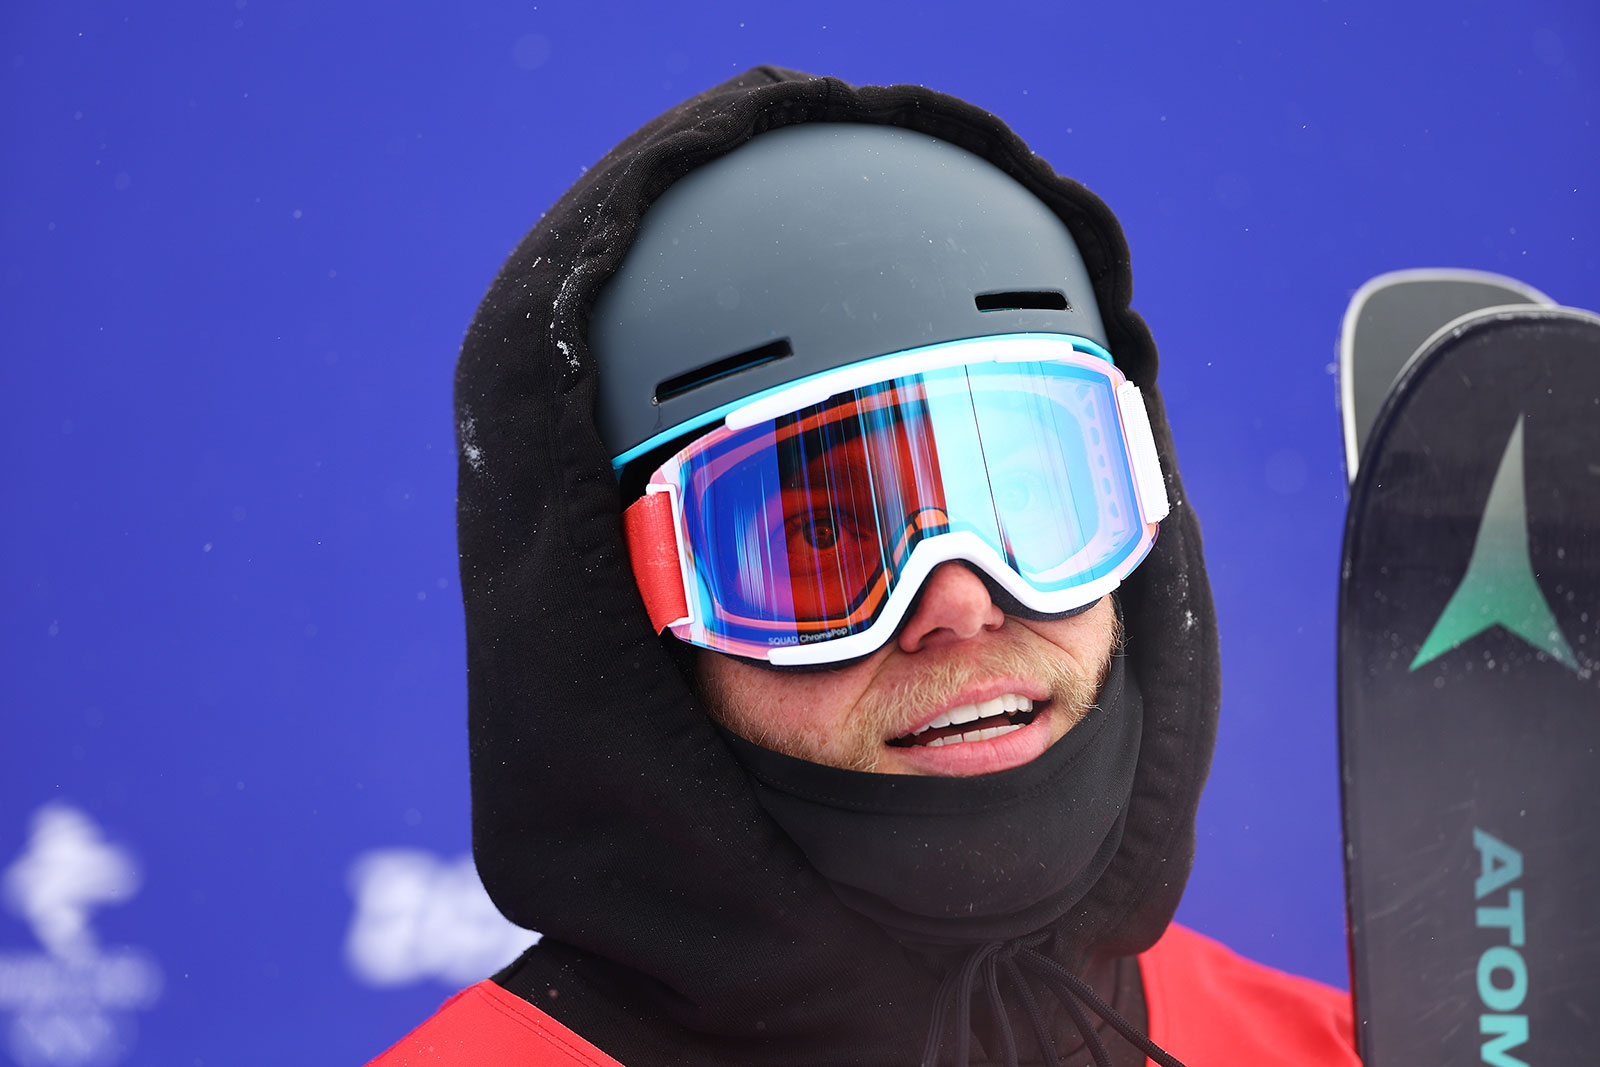 Gus Kenworthy waits for his score to come in during halfpipe qualification on February 17.